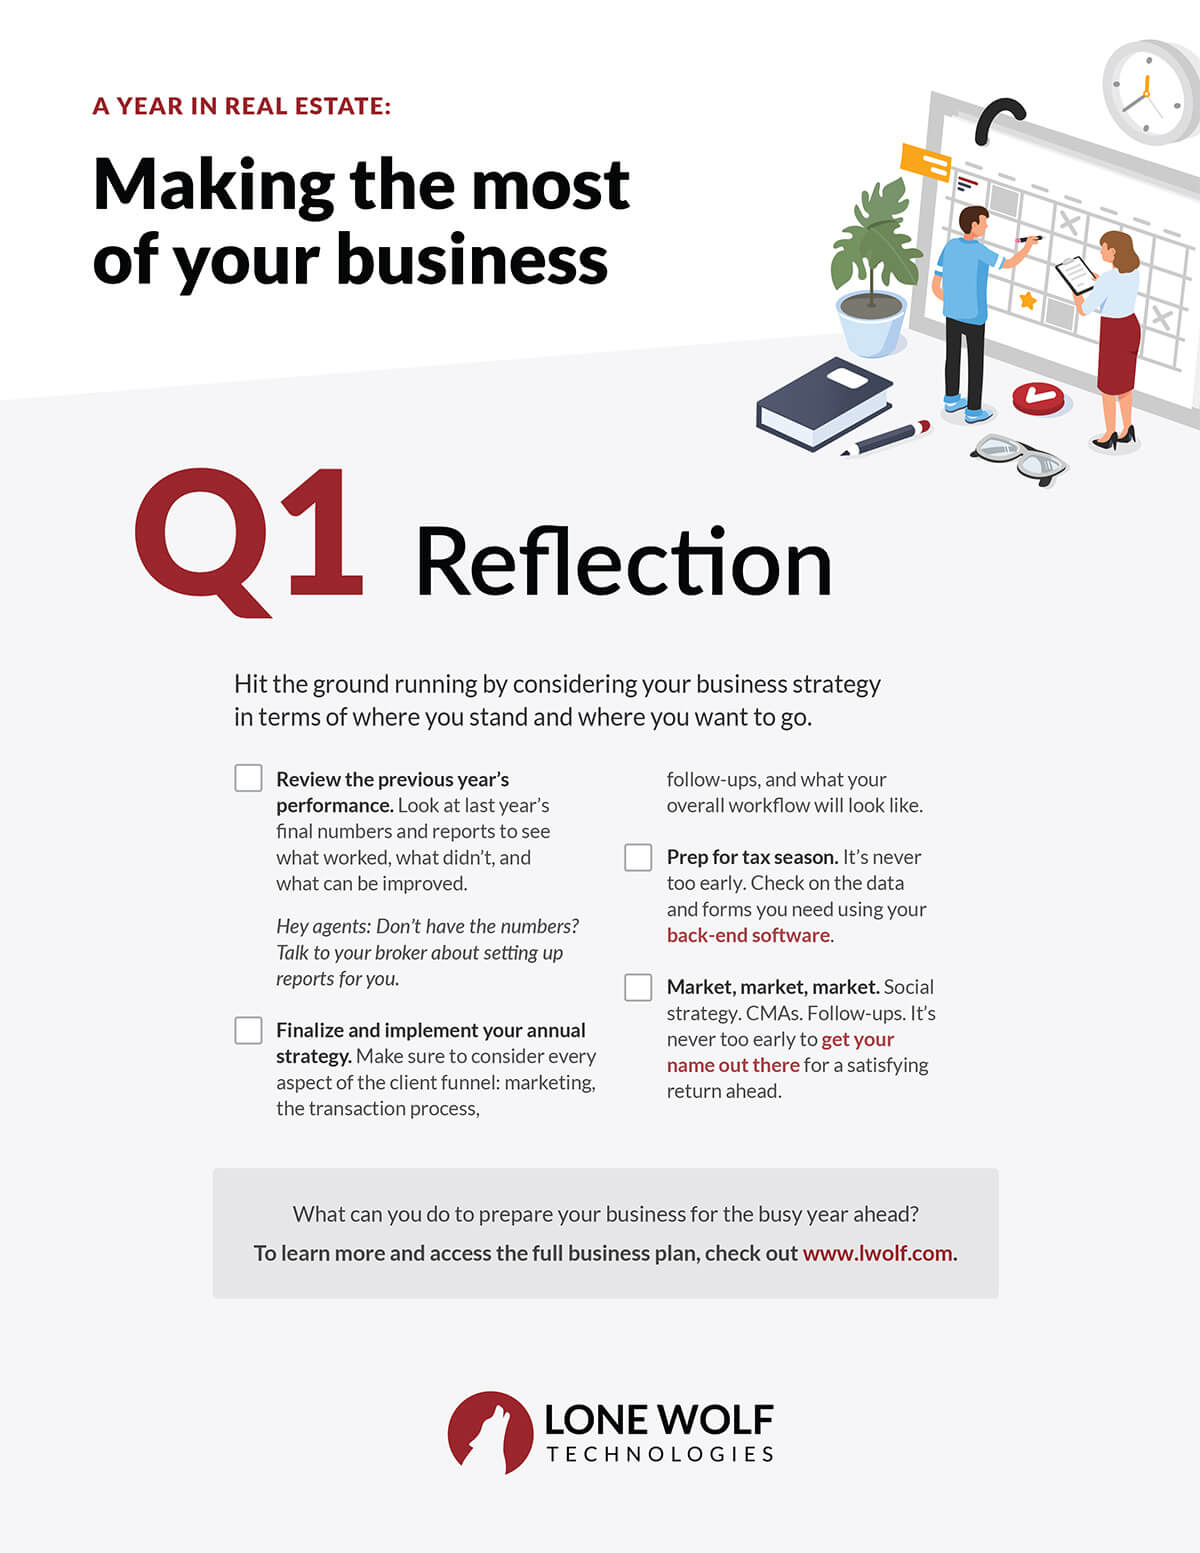 A preview of our infographic on business planning for the first quarter.